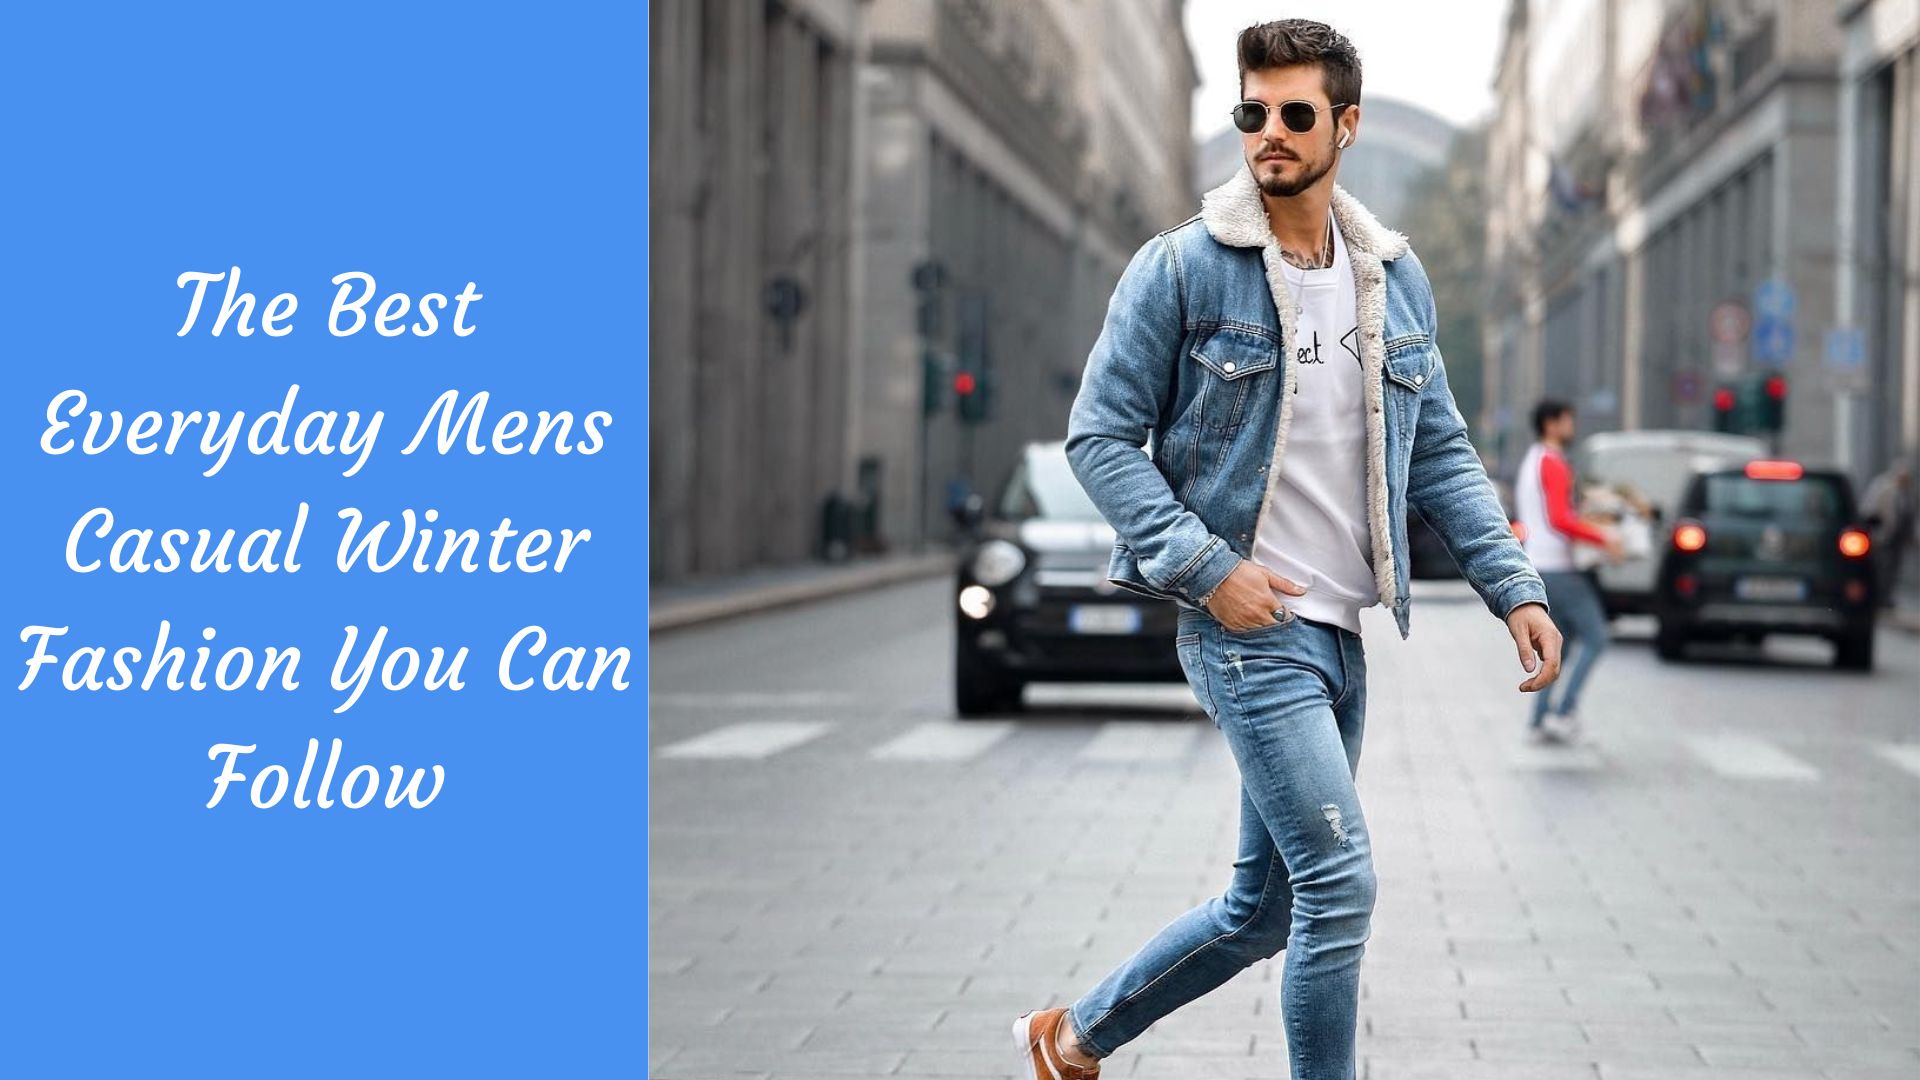 The Best Everyday Mens Casual Winter Fashion You Can Follow